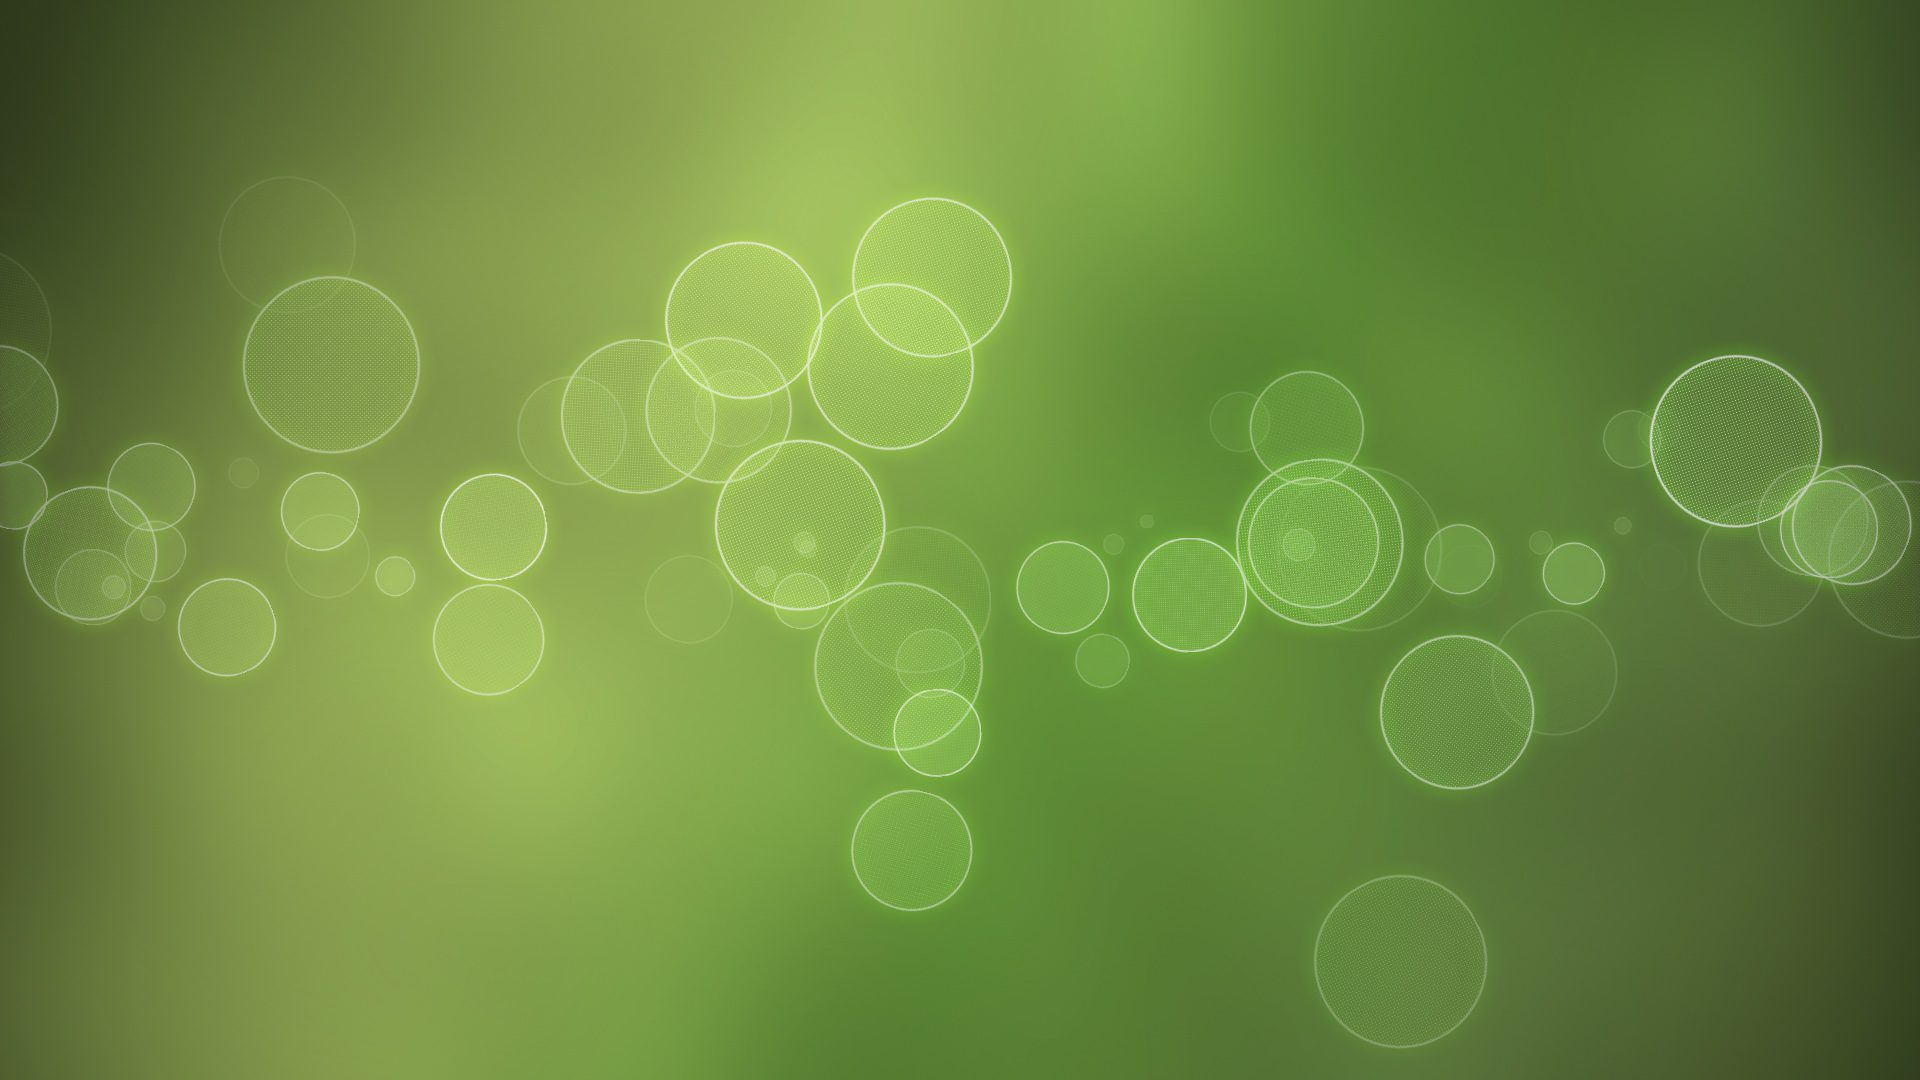 Bright-Bubbles-on-Light-Green-Background-Style-is-Thus-Clean-and-Simple-Looking-Good-on-Any-Computer-HD-Creative-Wallpaper